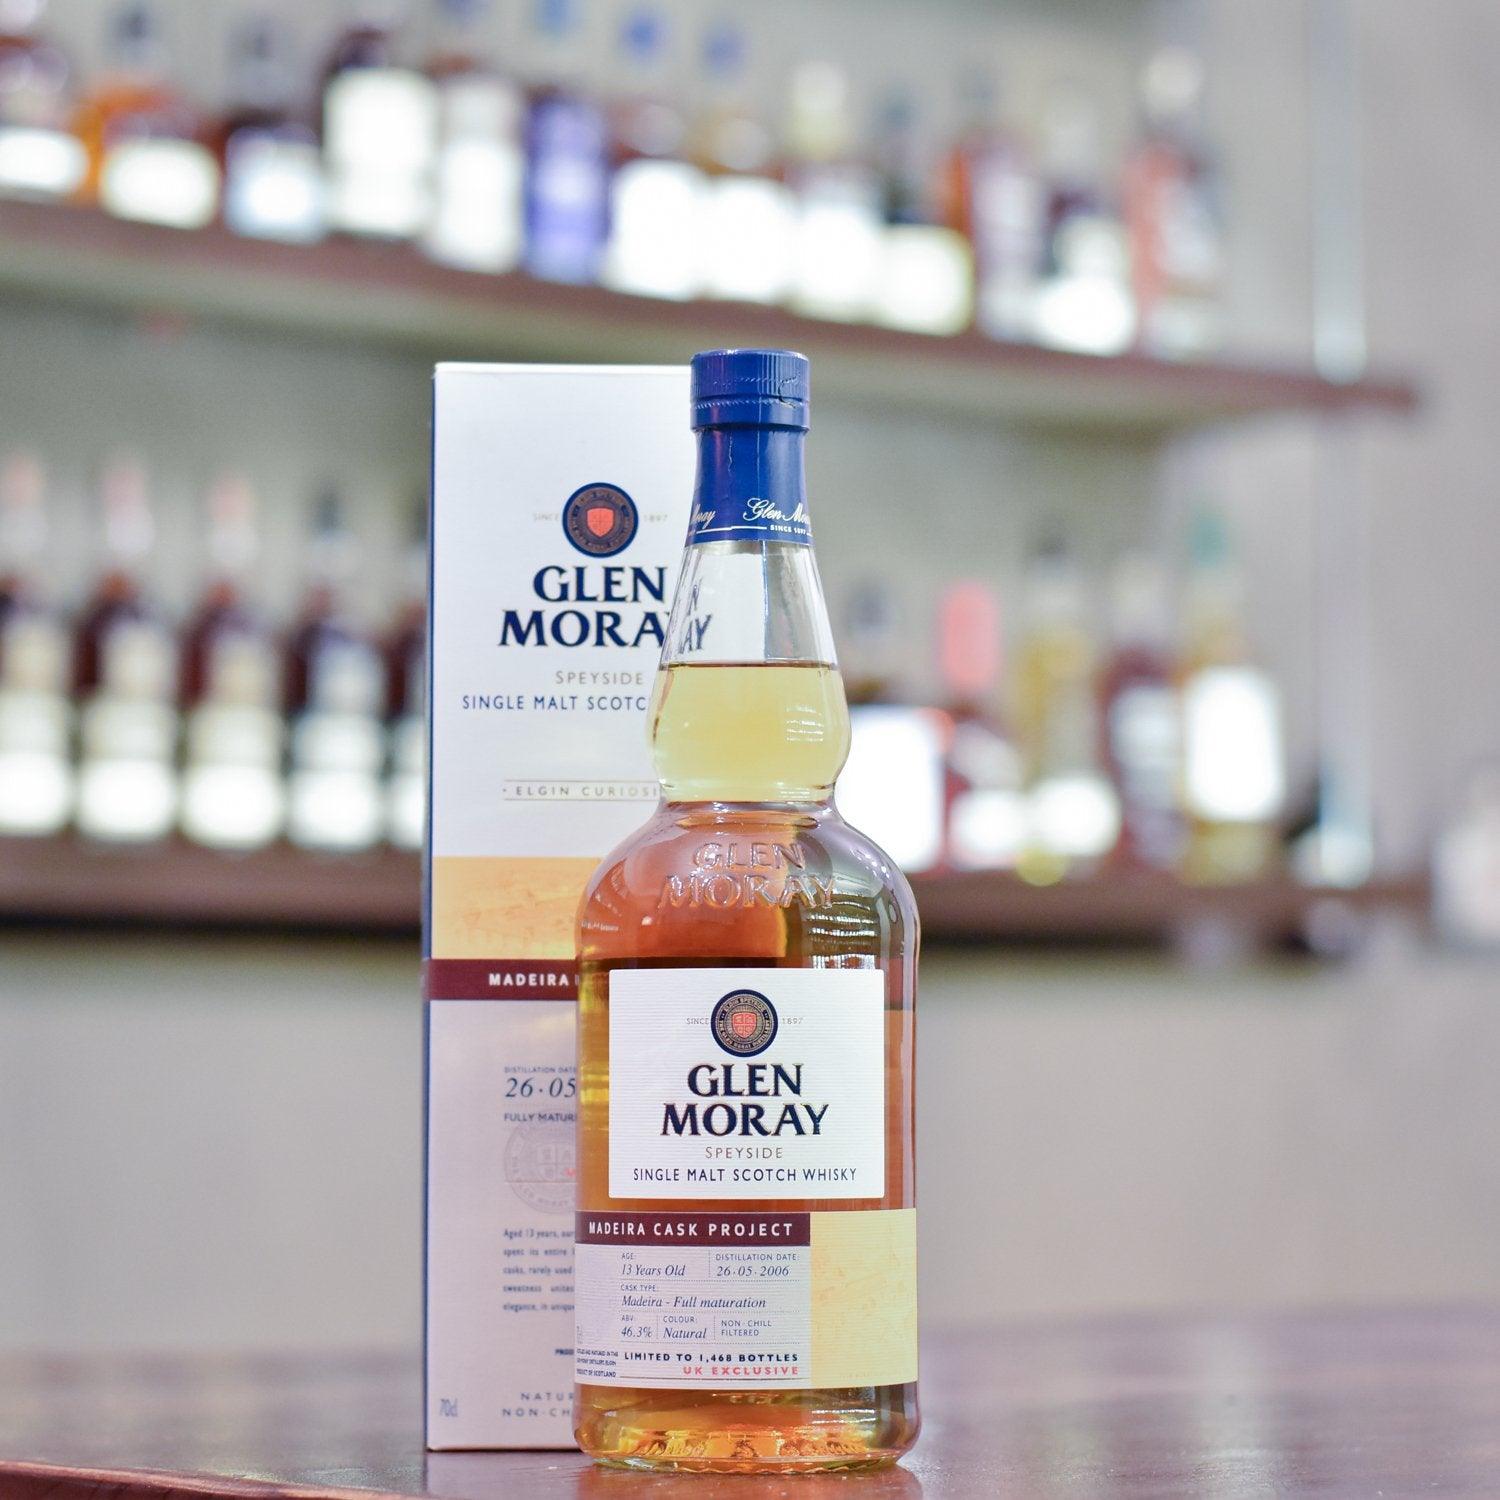 Glen Moray 13 Year Old 2006 Madeira Cask Project UK Exclusive - The Rare Malt